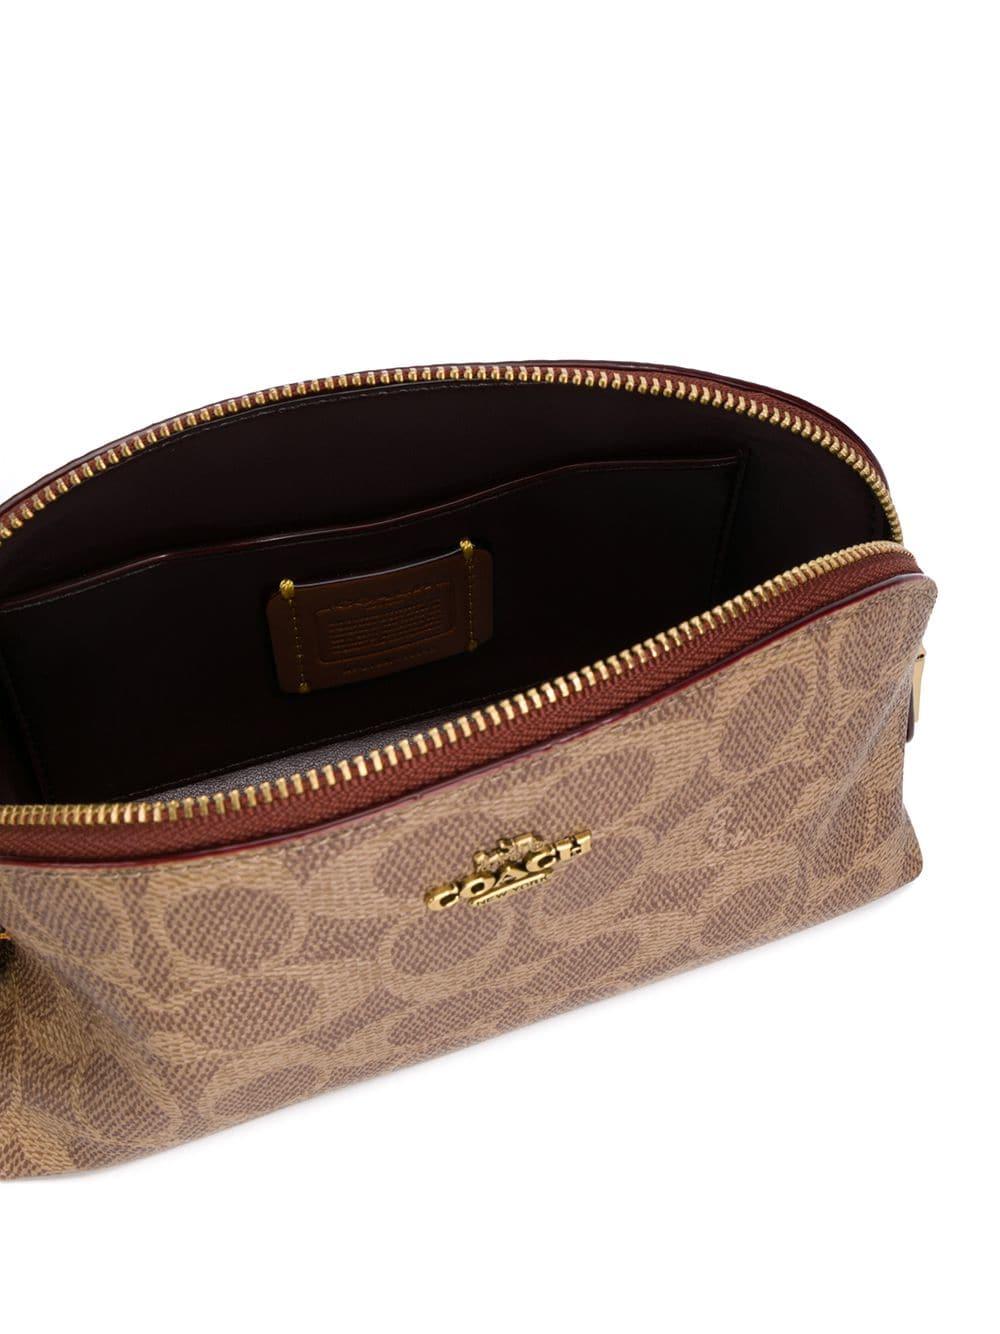 COACH Cosmetic Case In Signature Canvas in Brown | Lyst